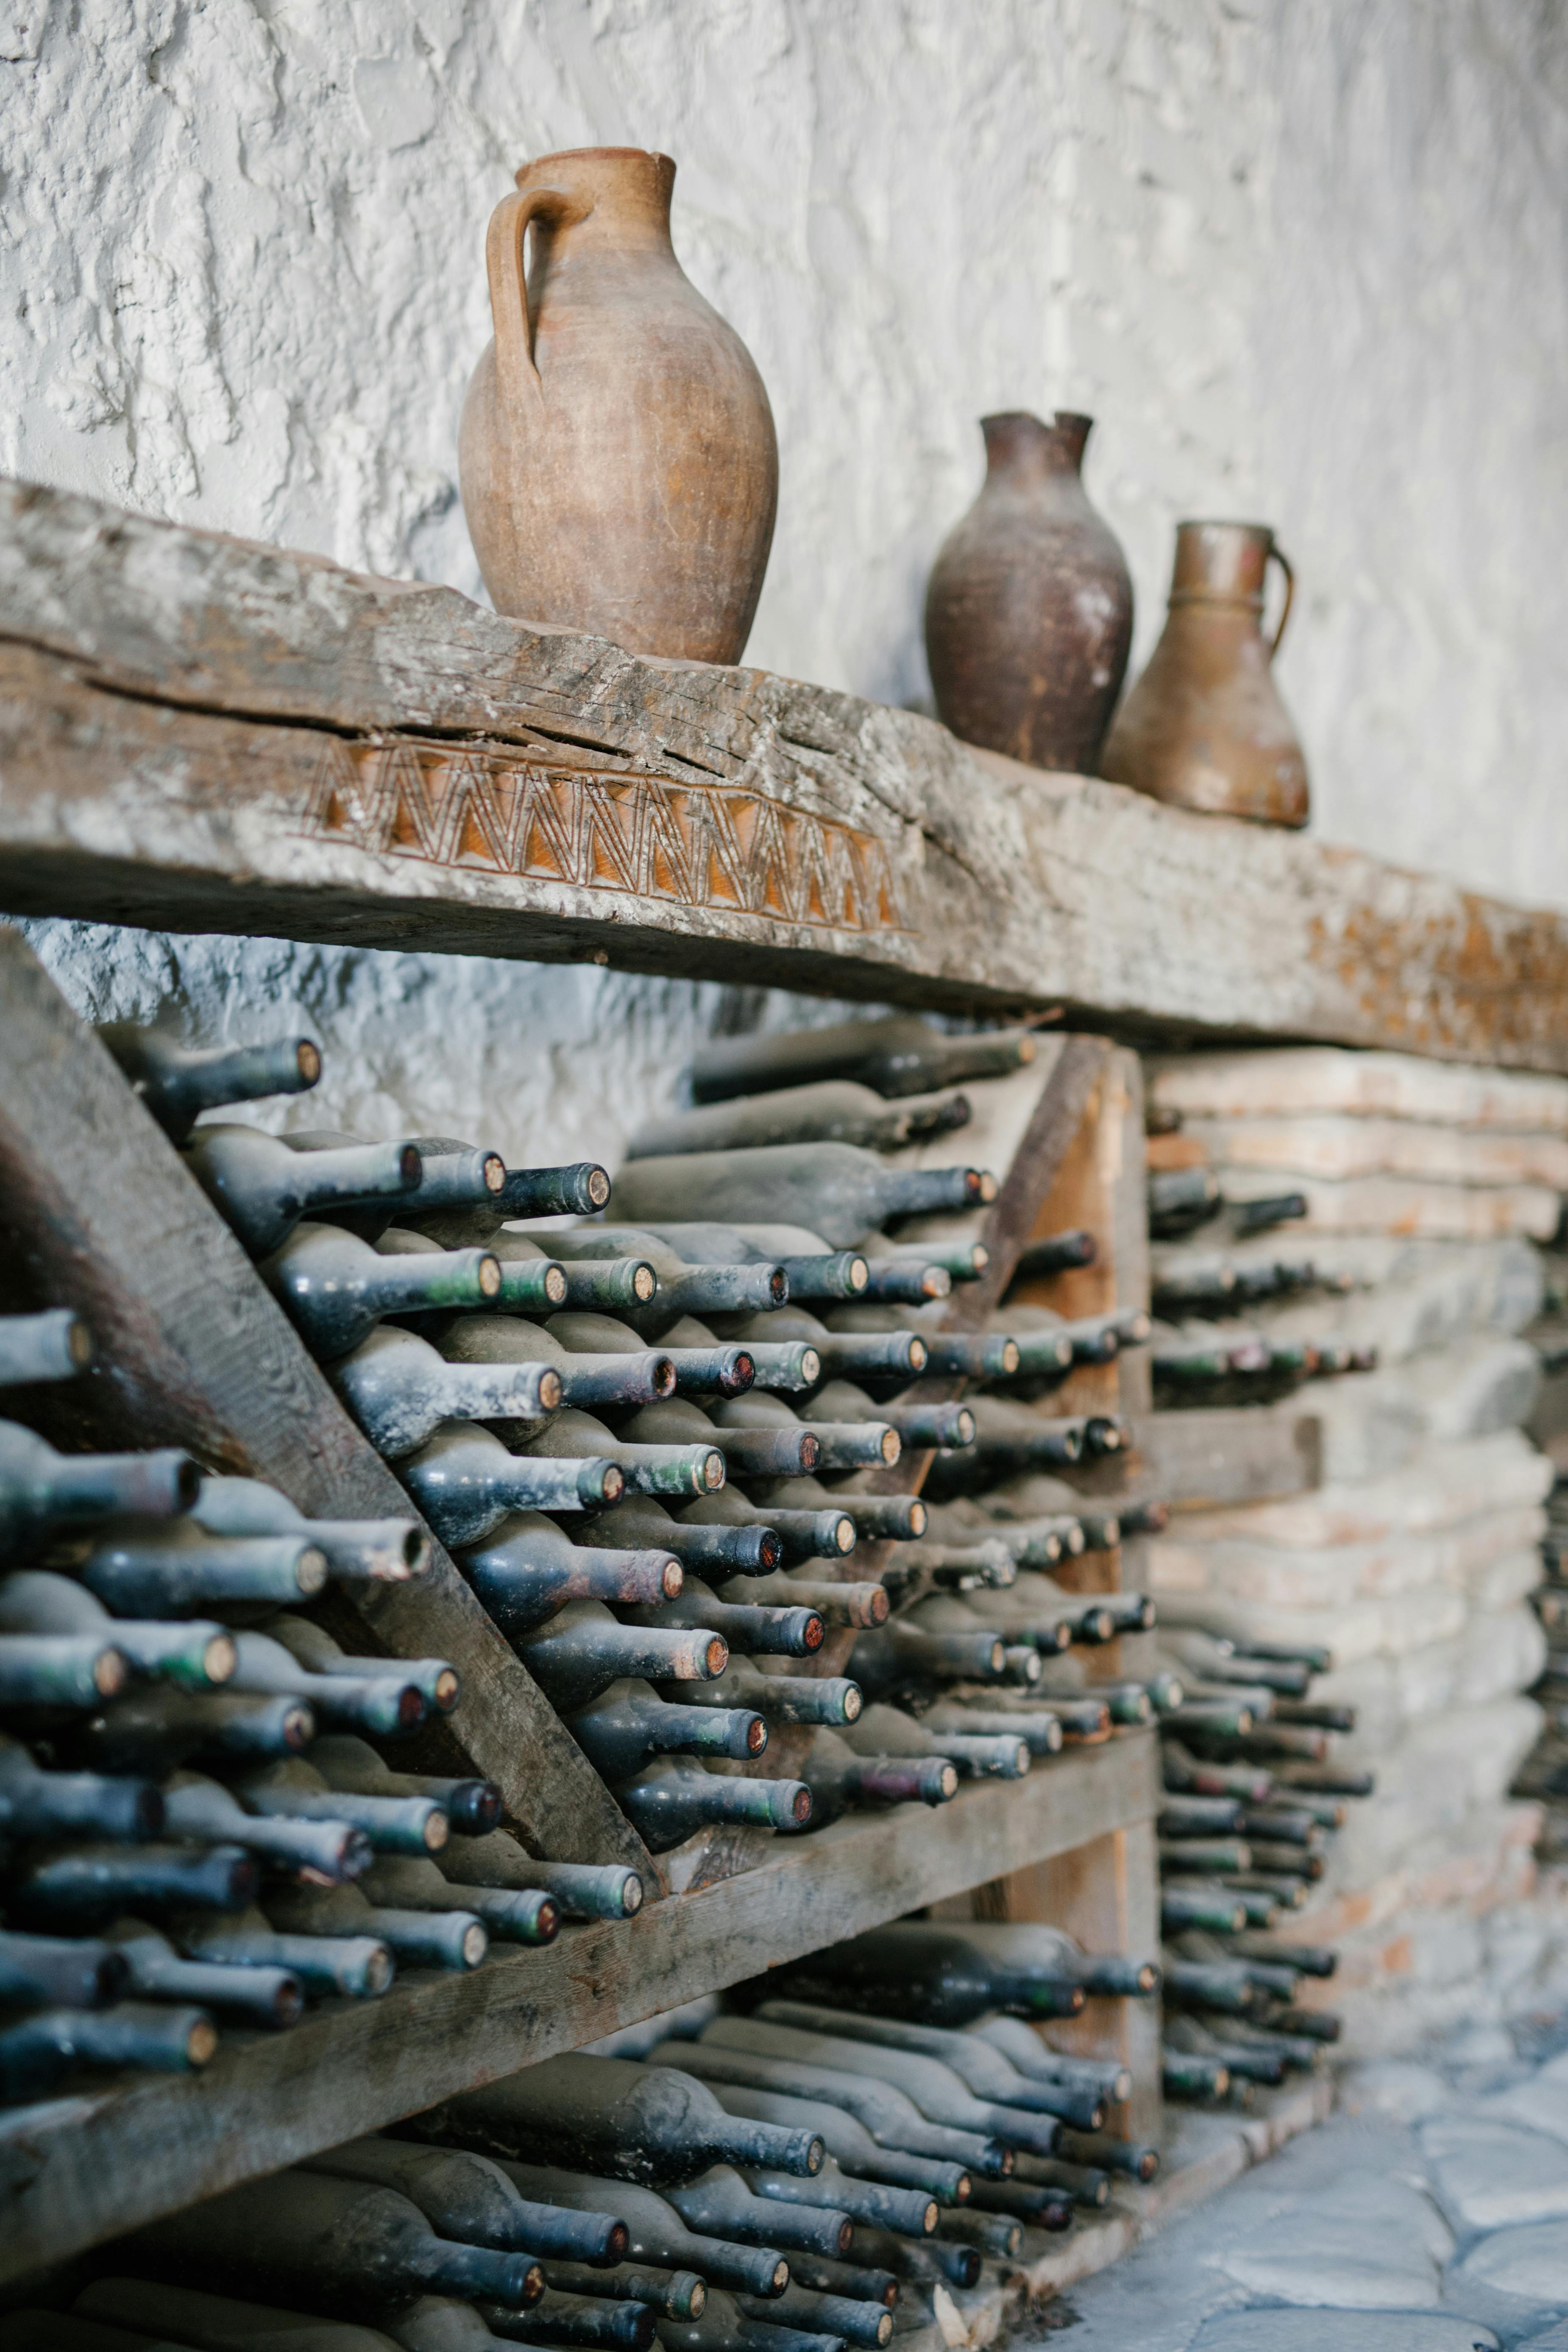 Wooden shelves with dusty glass bottles of wine | Source: Pexels